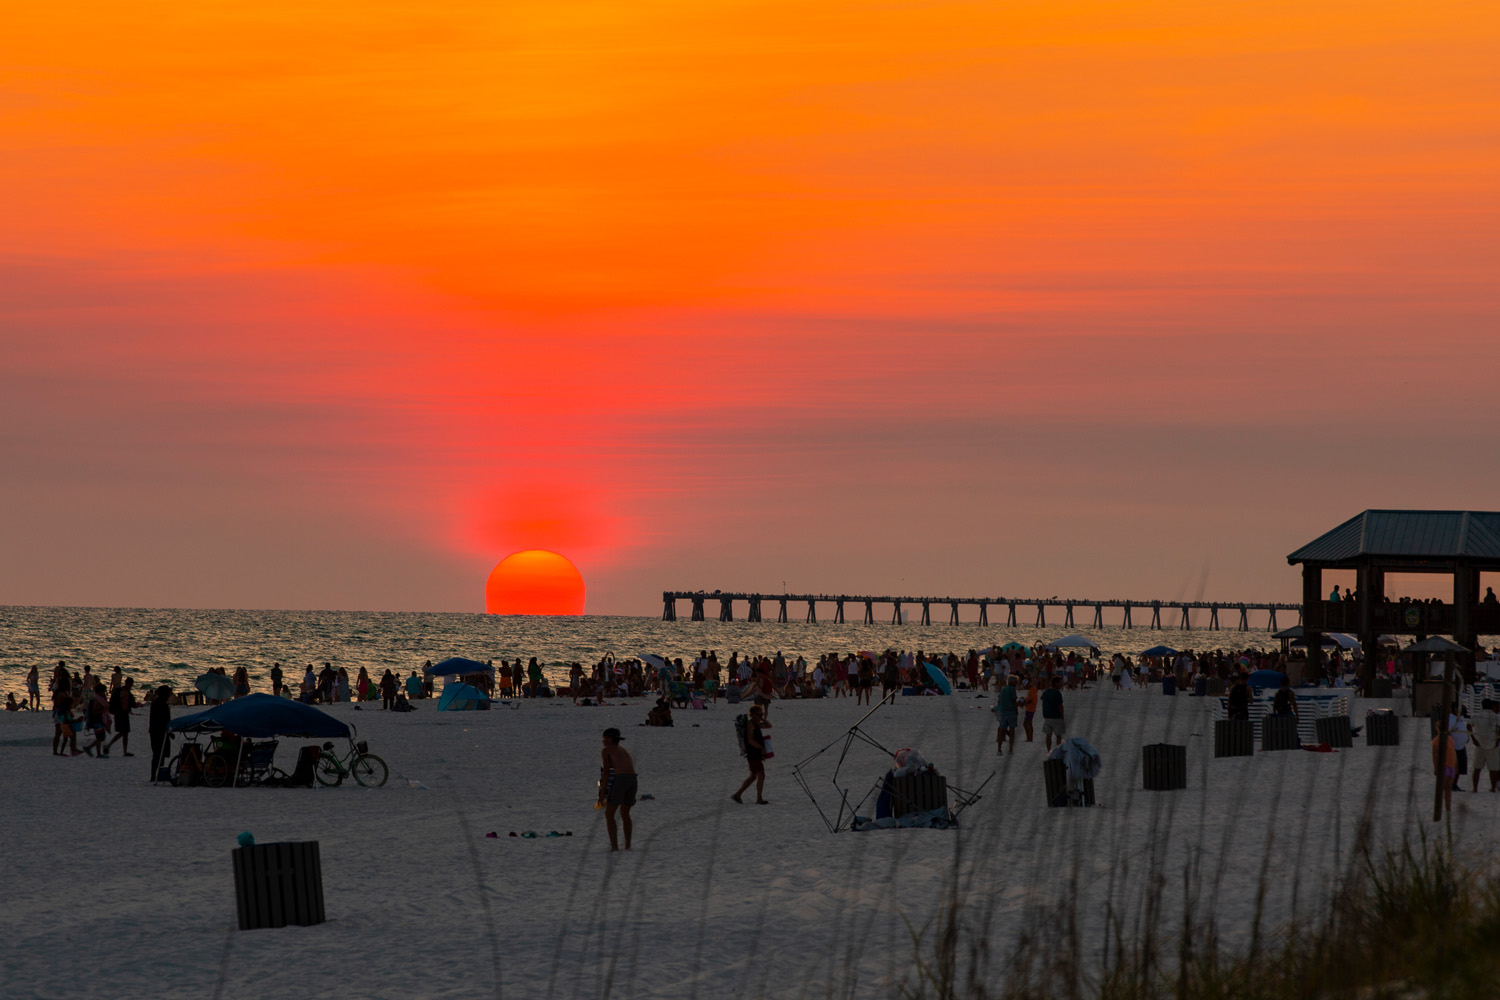 About us, off season reasons to stay in Panama City beach.